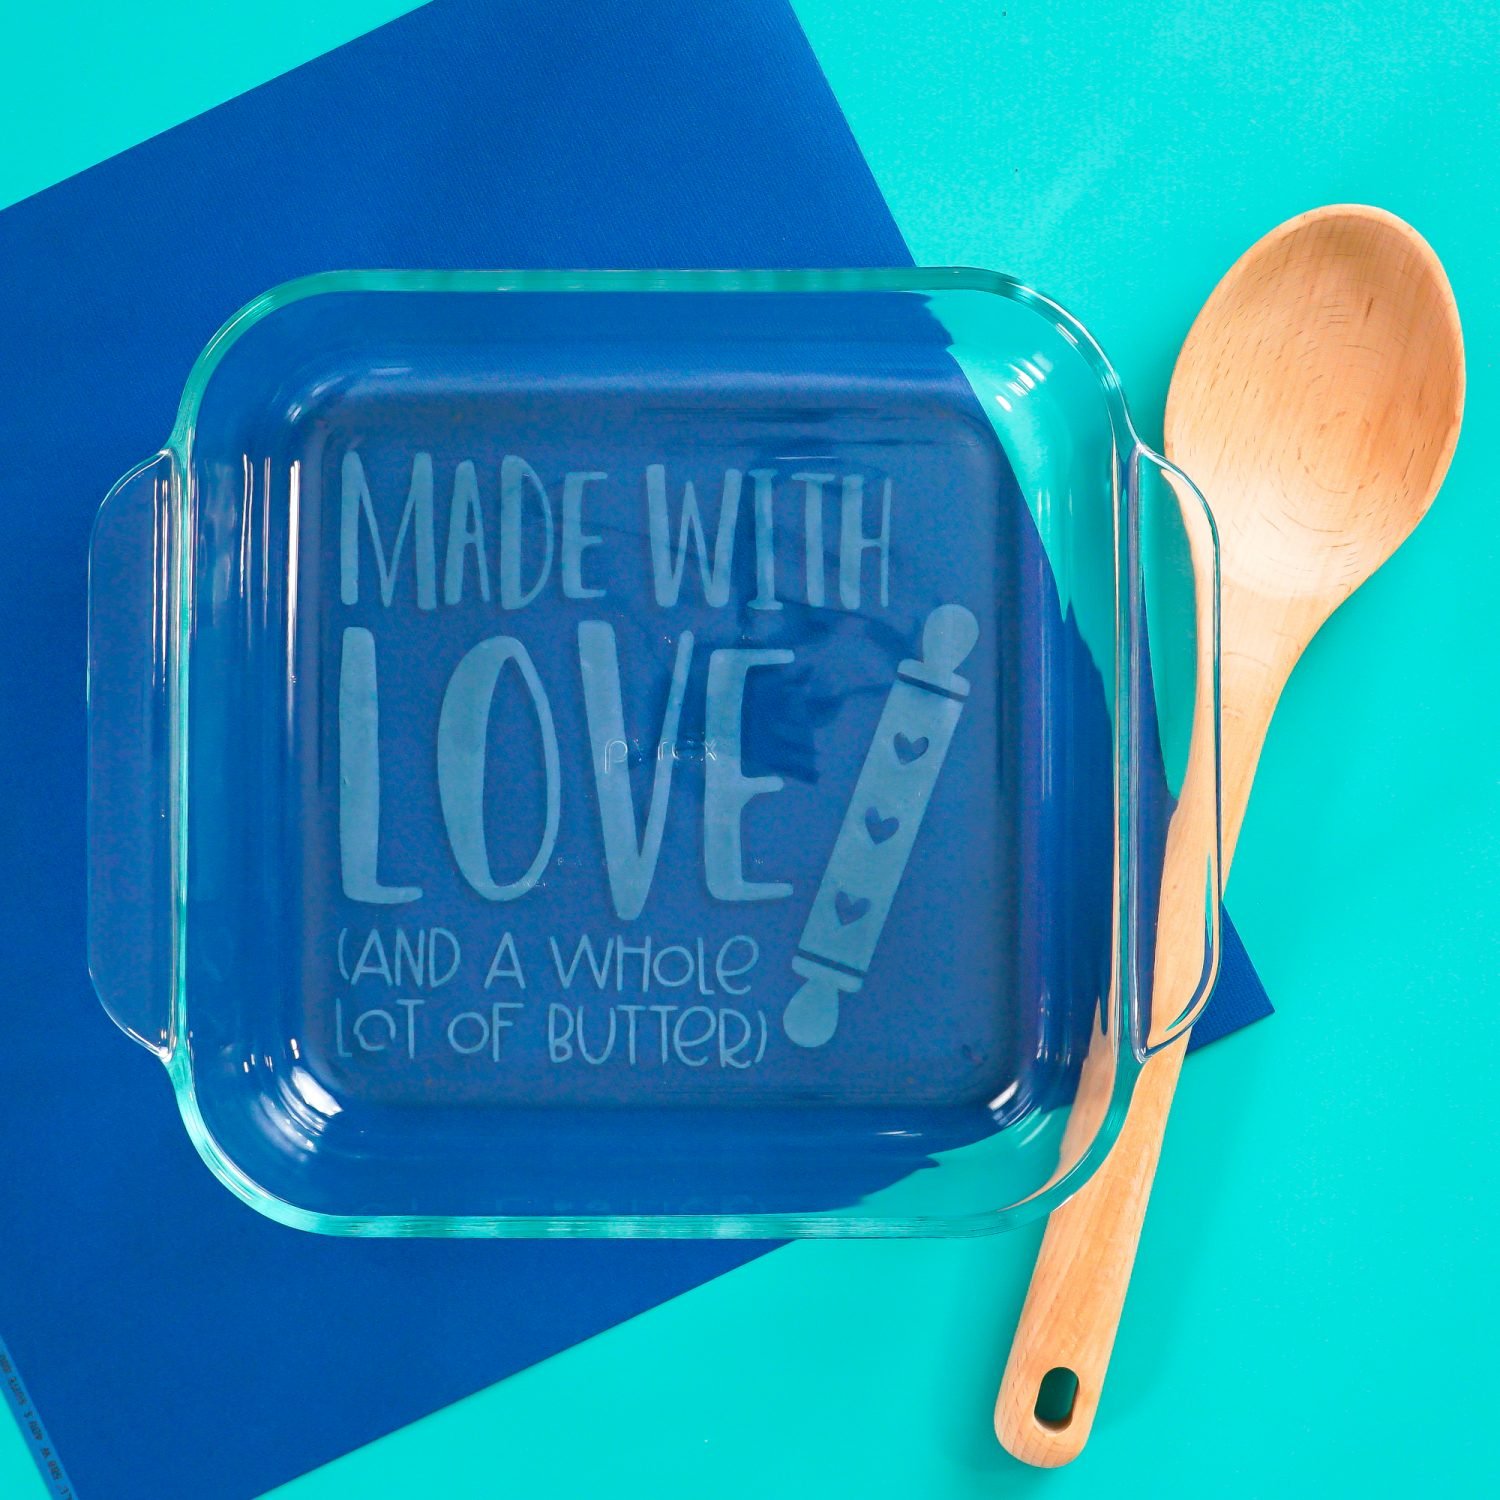 Finished baking dish on blue background with spoon.